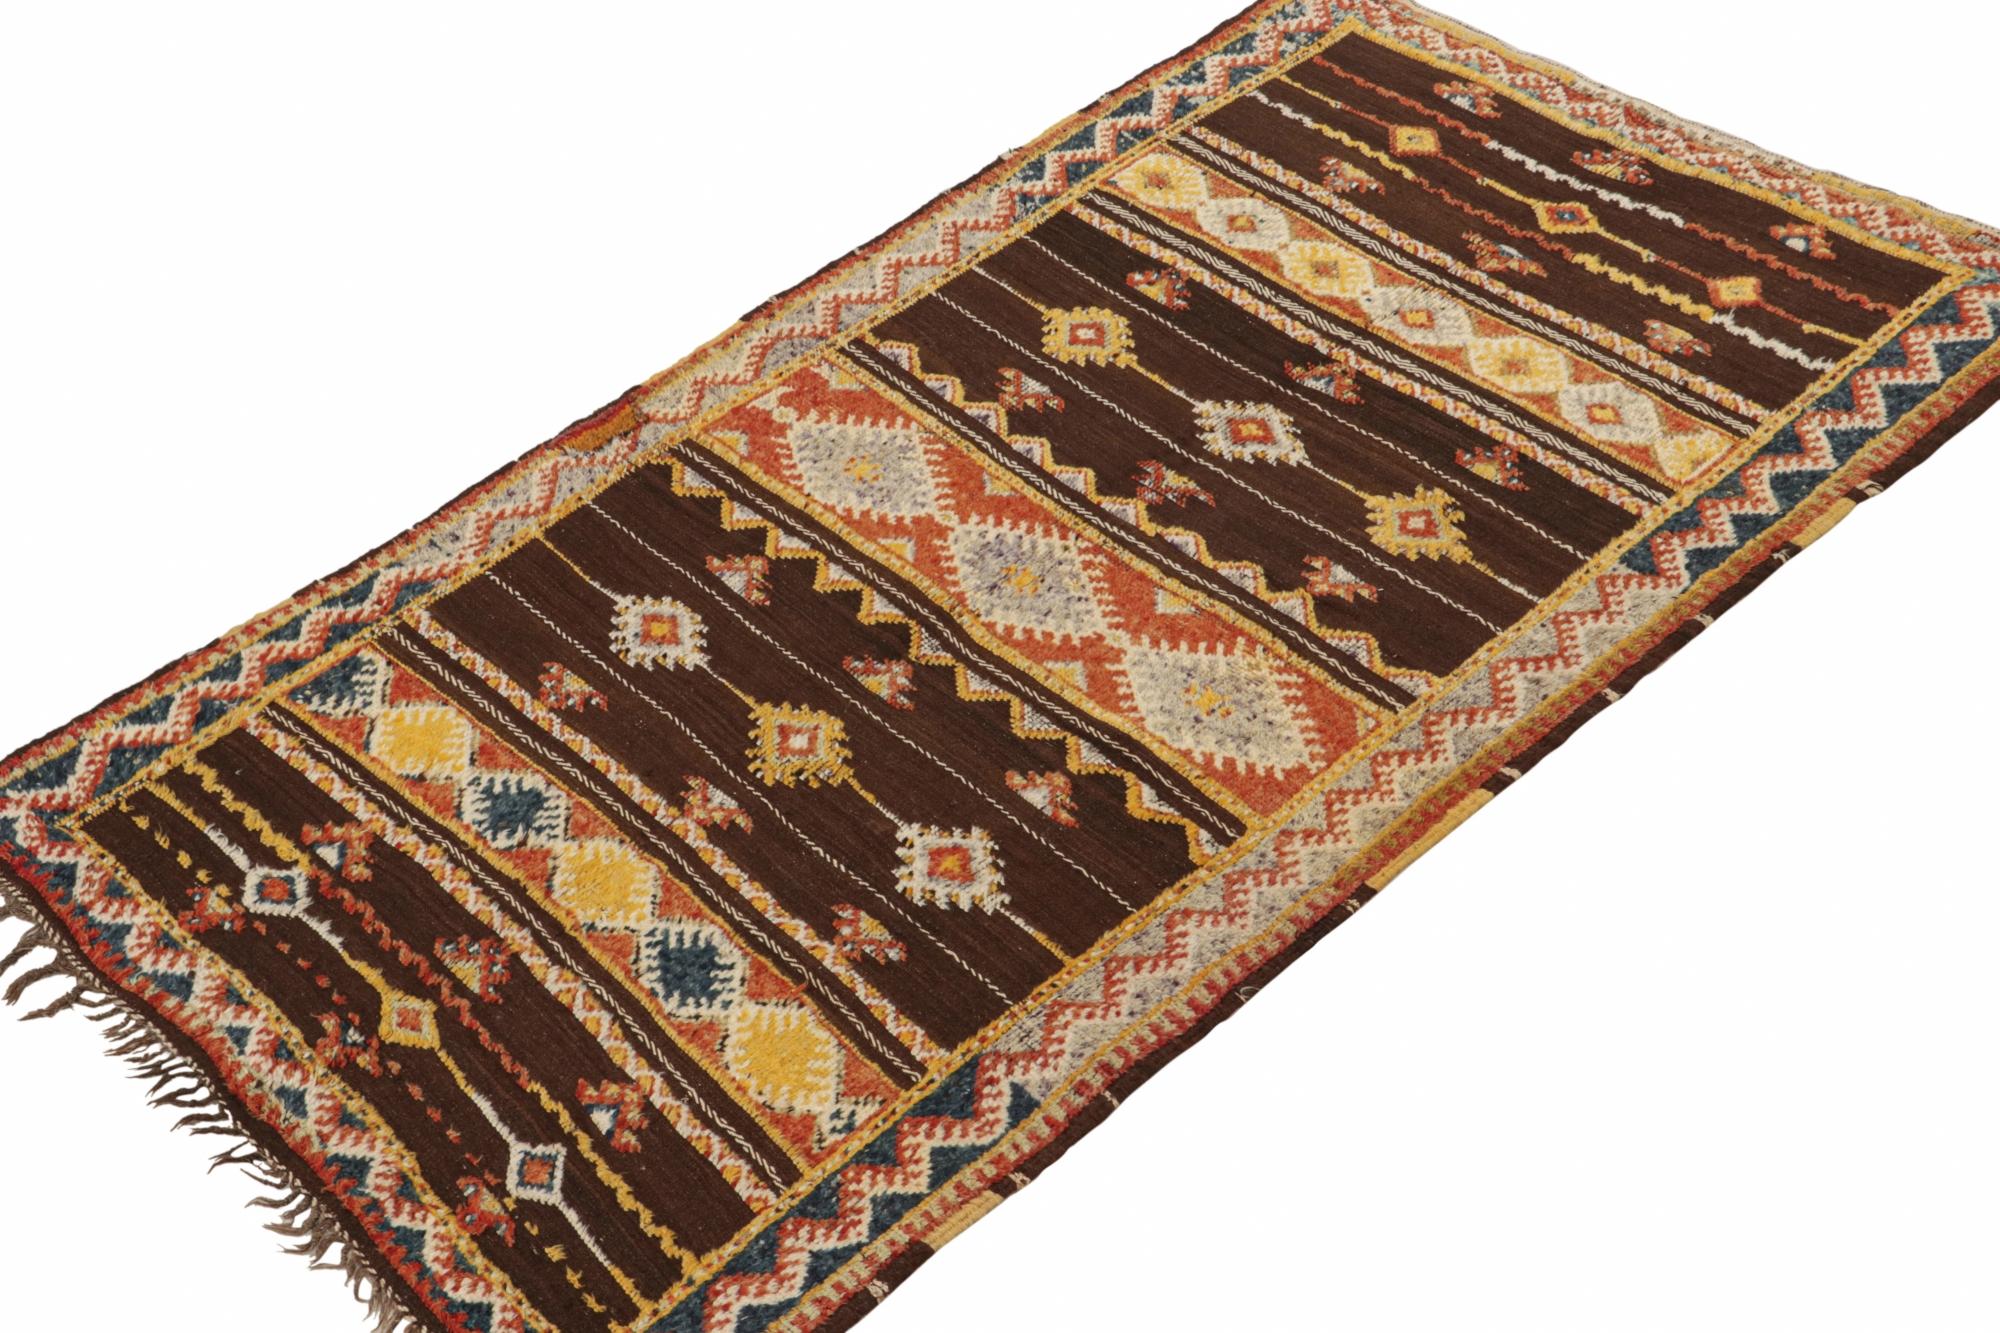 Hand-Woven Vintage Moroccan Kilim rug in Brown with Geometric Patterns For Sale